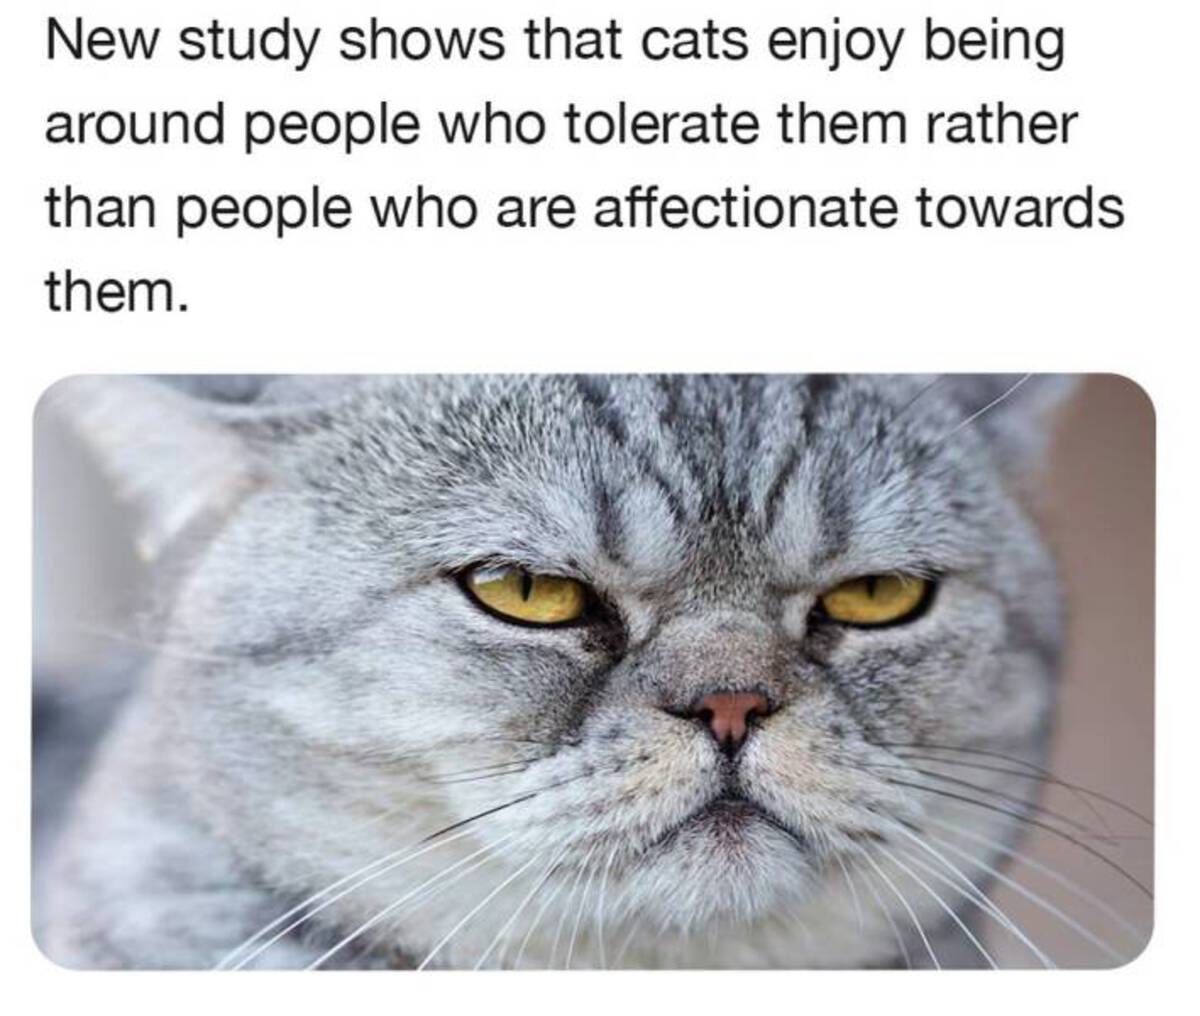 cat - New study shows that cats enjoy being around people who tolerate them rather than people who are affectionate towards them.